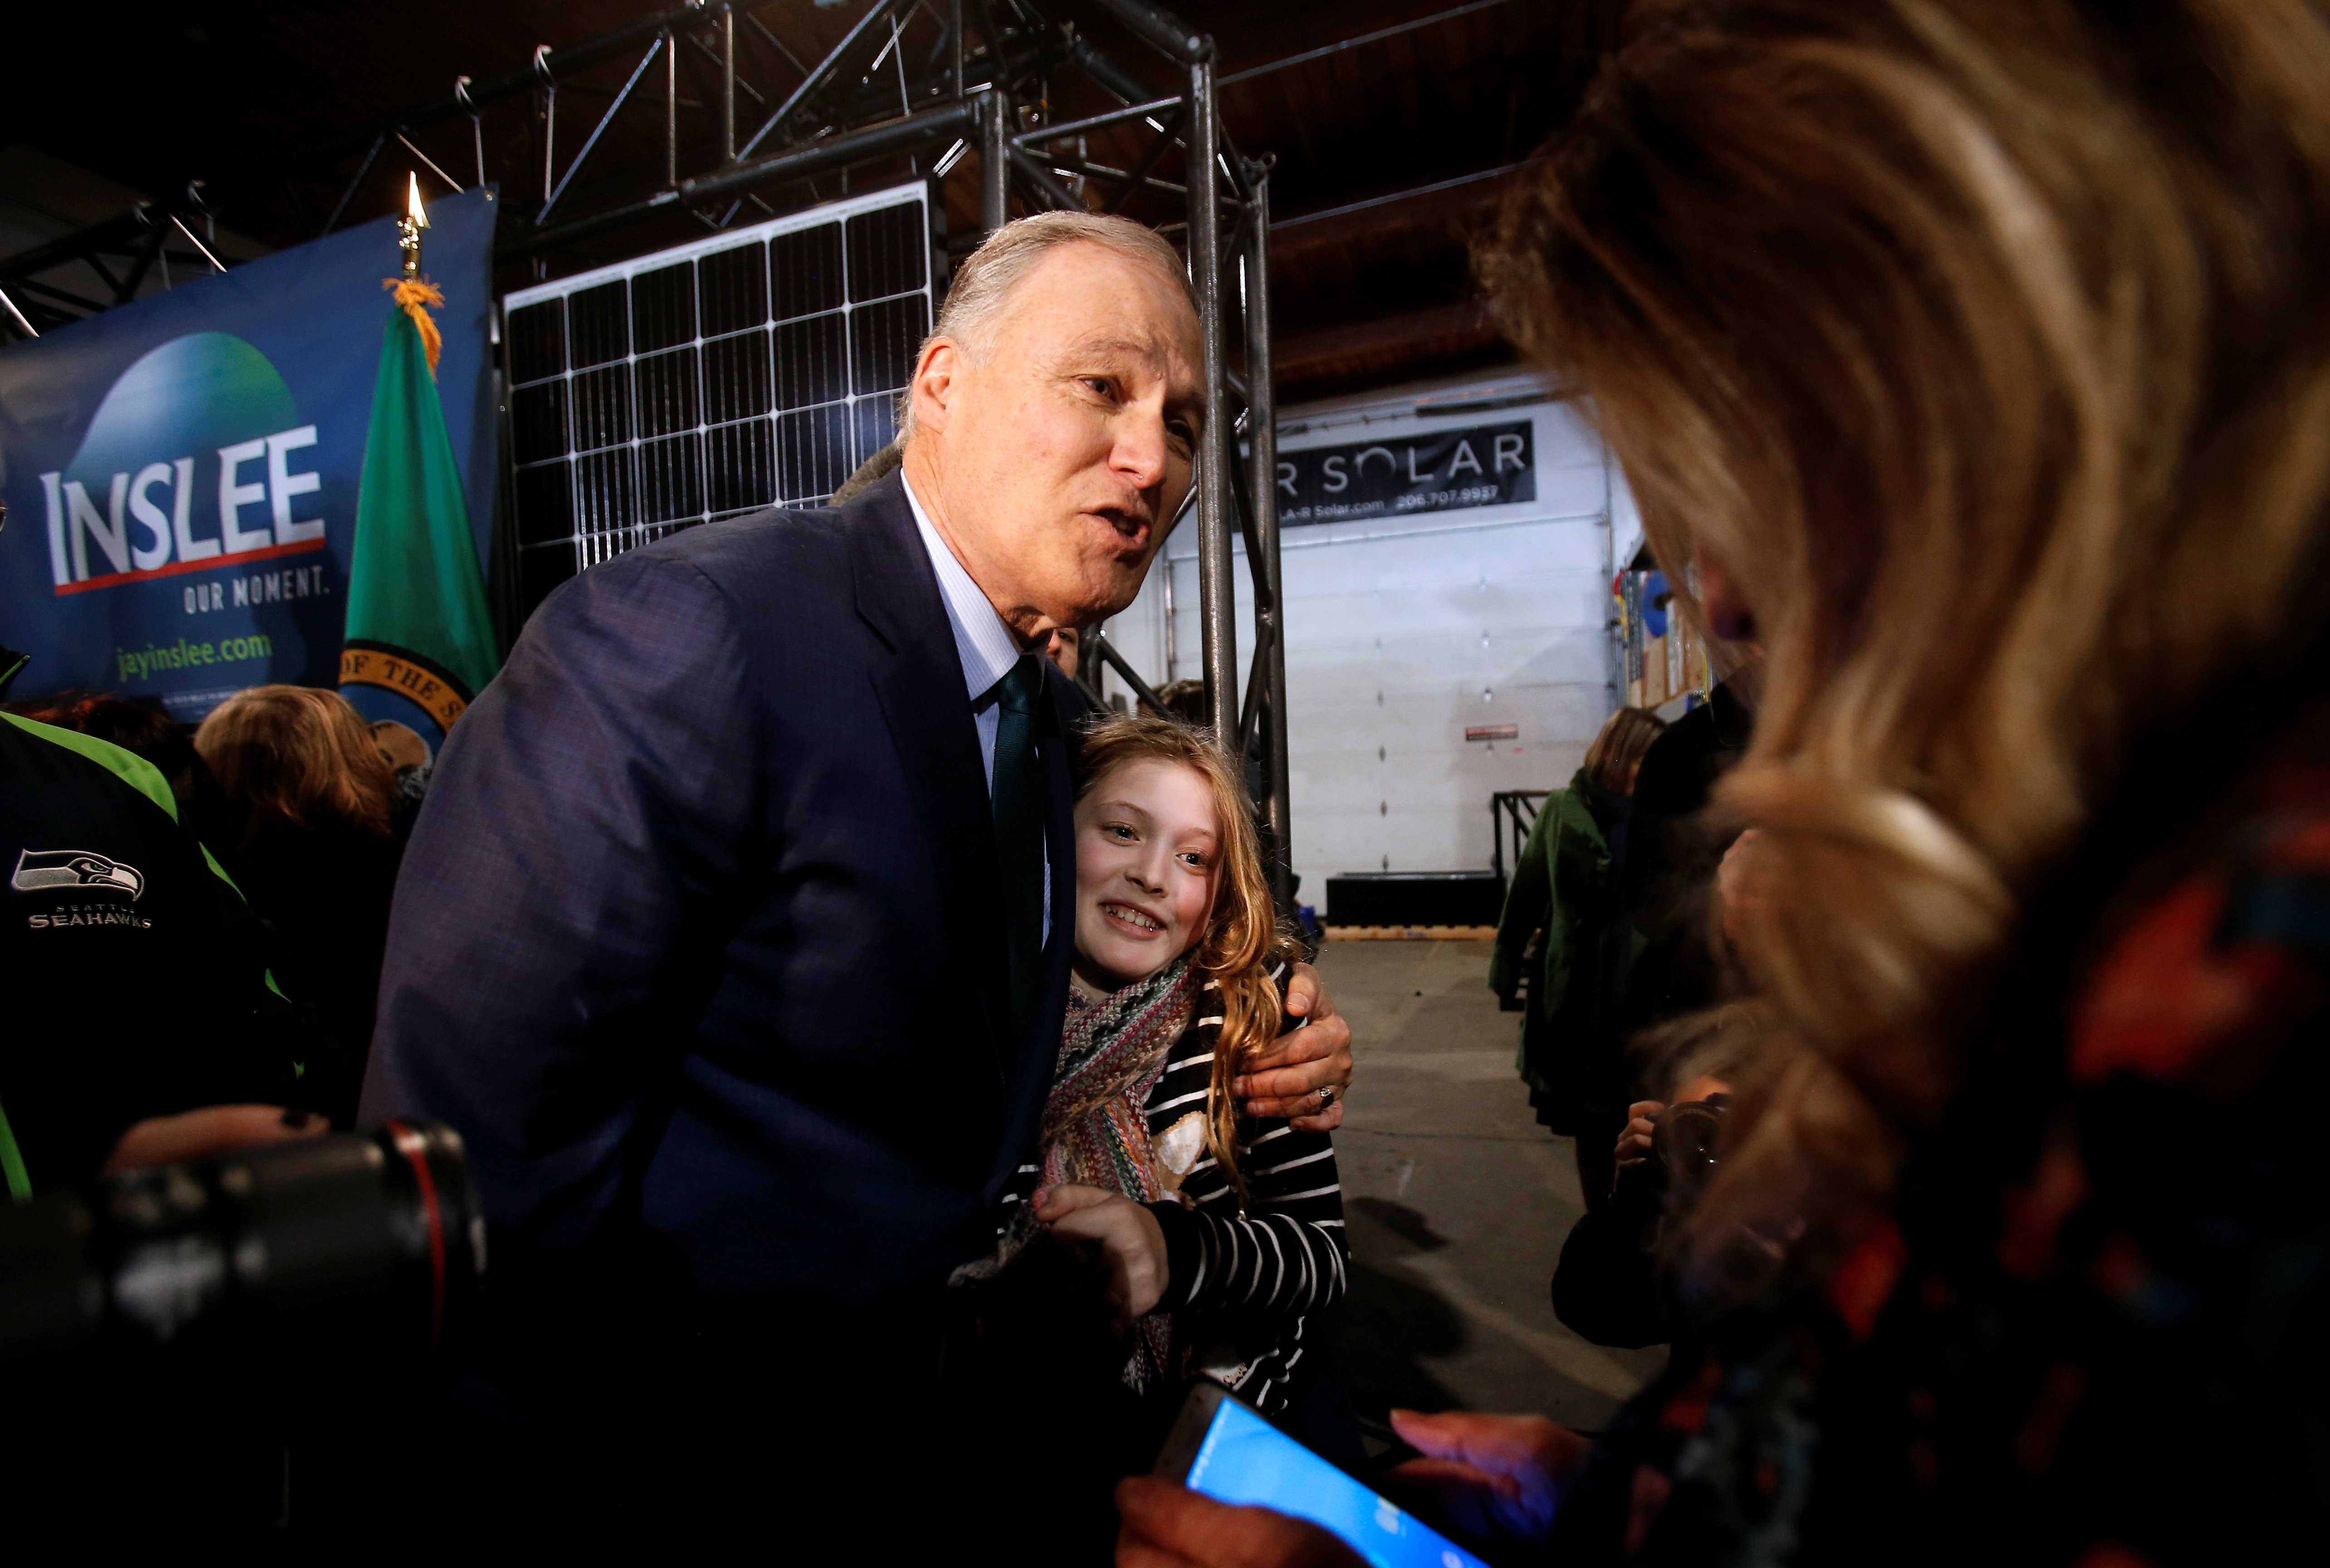 Washington state Governor Jay Inslee hugs Noreus, 11, of Redmond, Washington during a news conference to announce his decision to seek the Democratic Party's nomination for president in 2020 at A&R Solar in Seattle